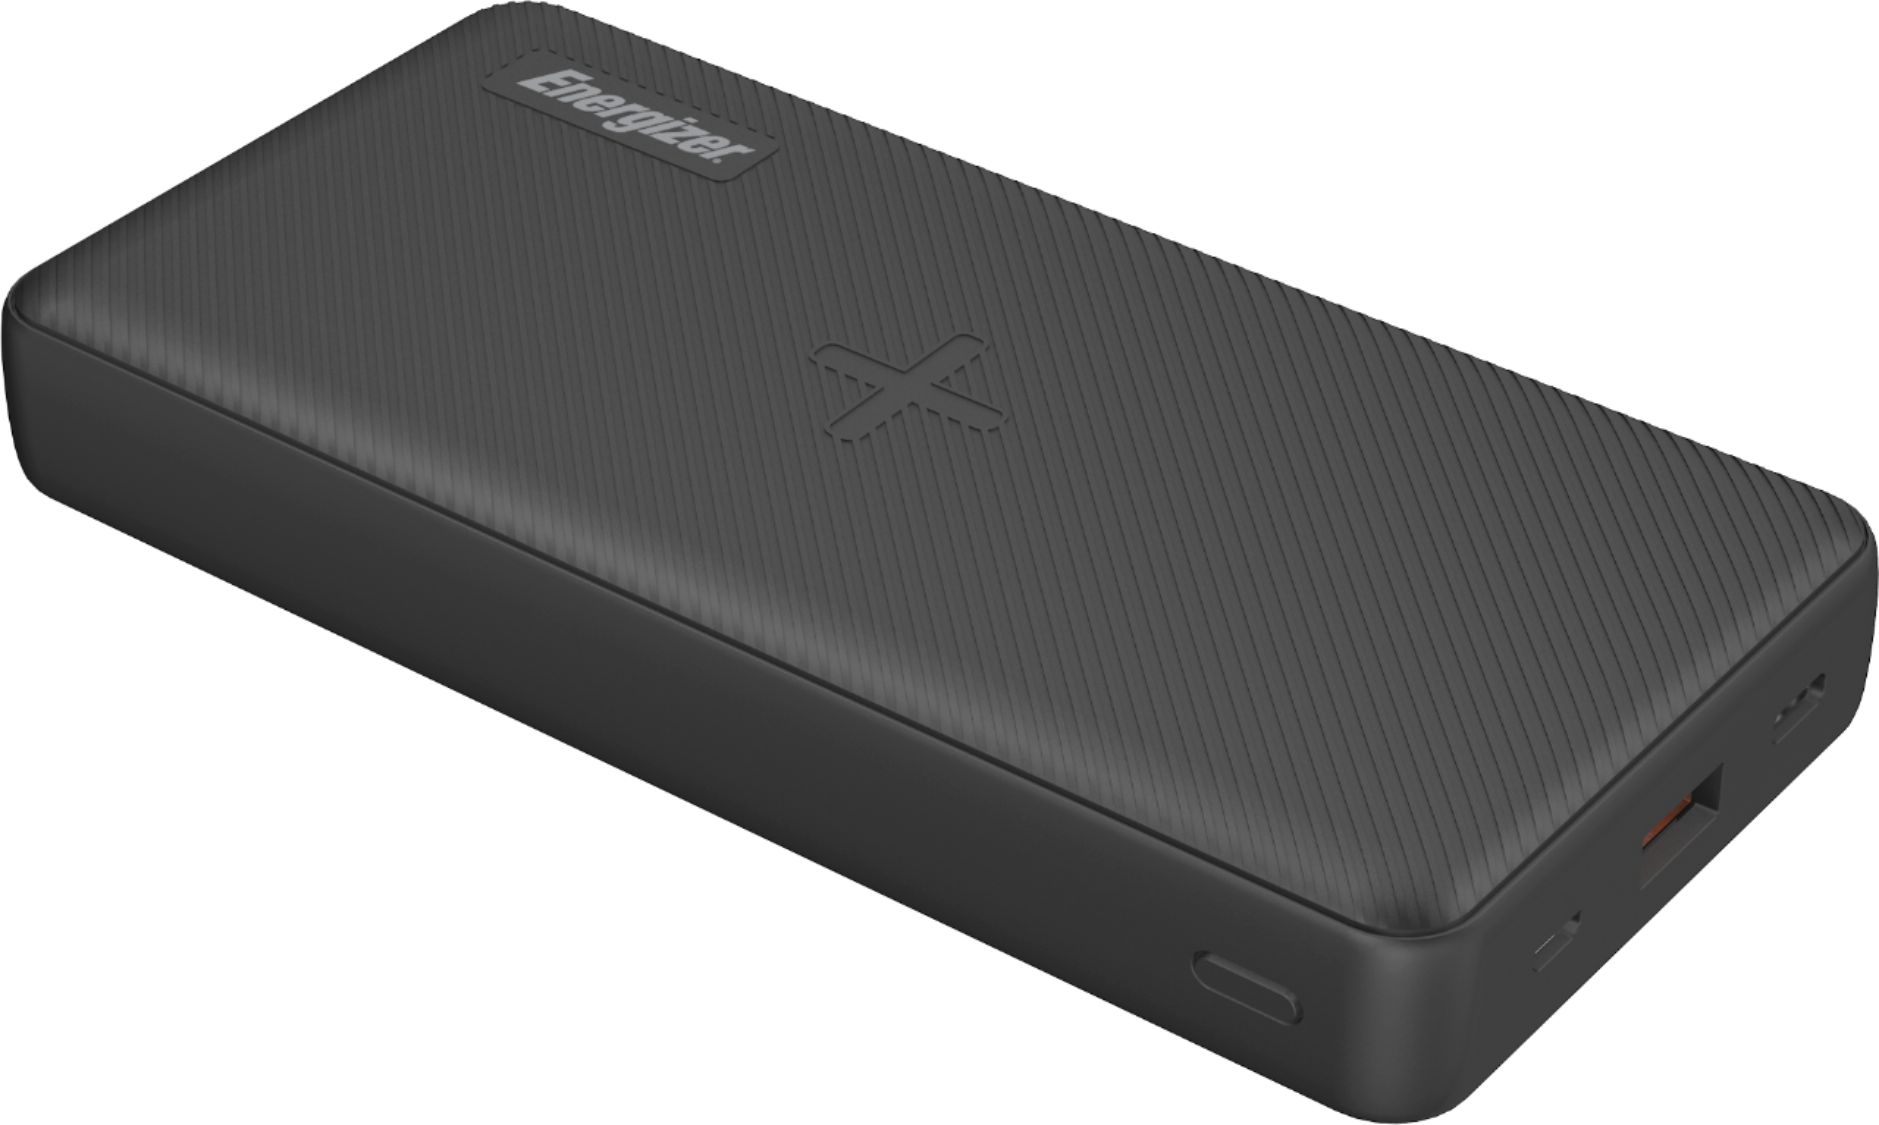 Bitterheid uitzending Geen Best Buy: Energizer Ultimate Lithium 20,000mAh 20W Qi Wireless Portable  Charger/Power Bank QC 3.0 & PD 3.0 for Apple, Android, USB Devices Black  QE20044PQ